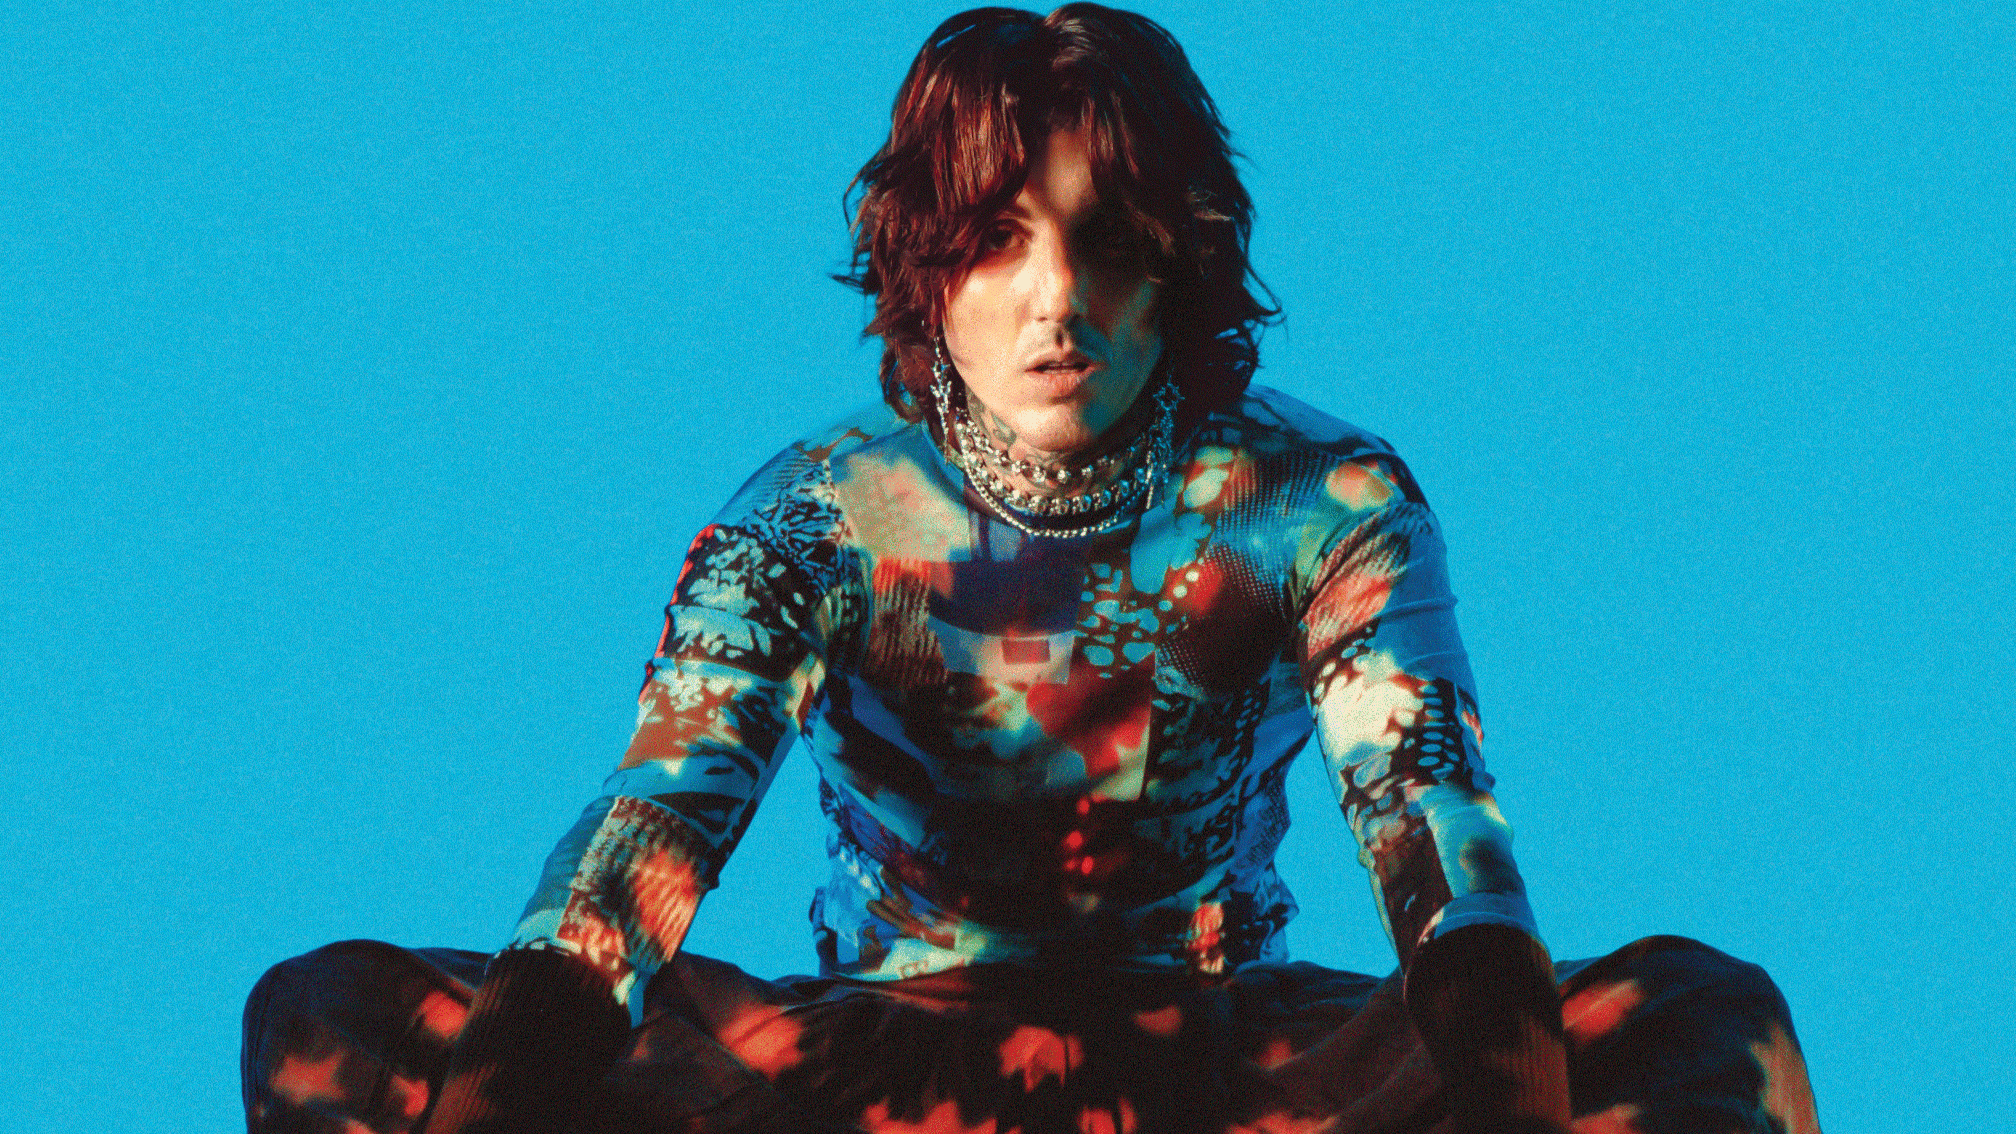 900+ Best Oliver Sykes. ideas in 2023  oliver sykes, bring me the horizon, oli  sykes